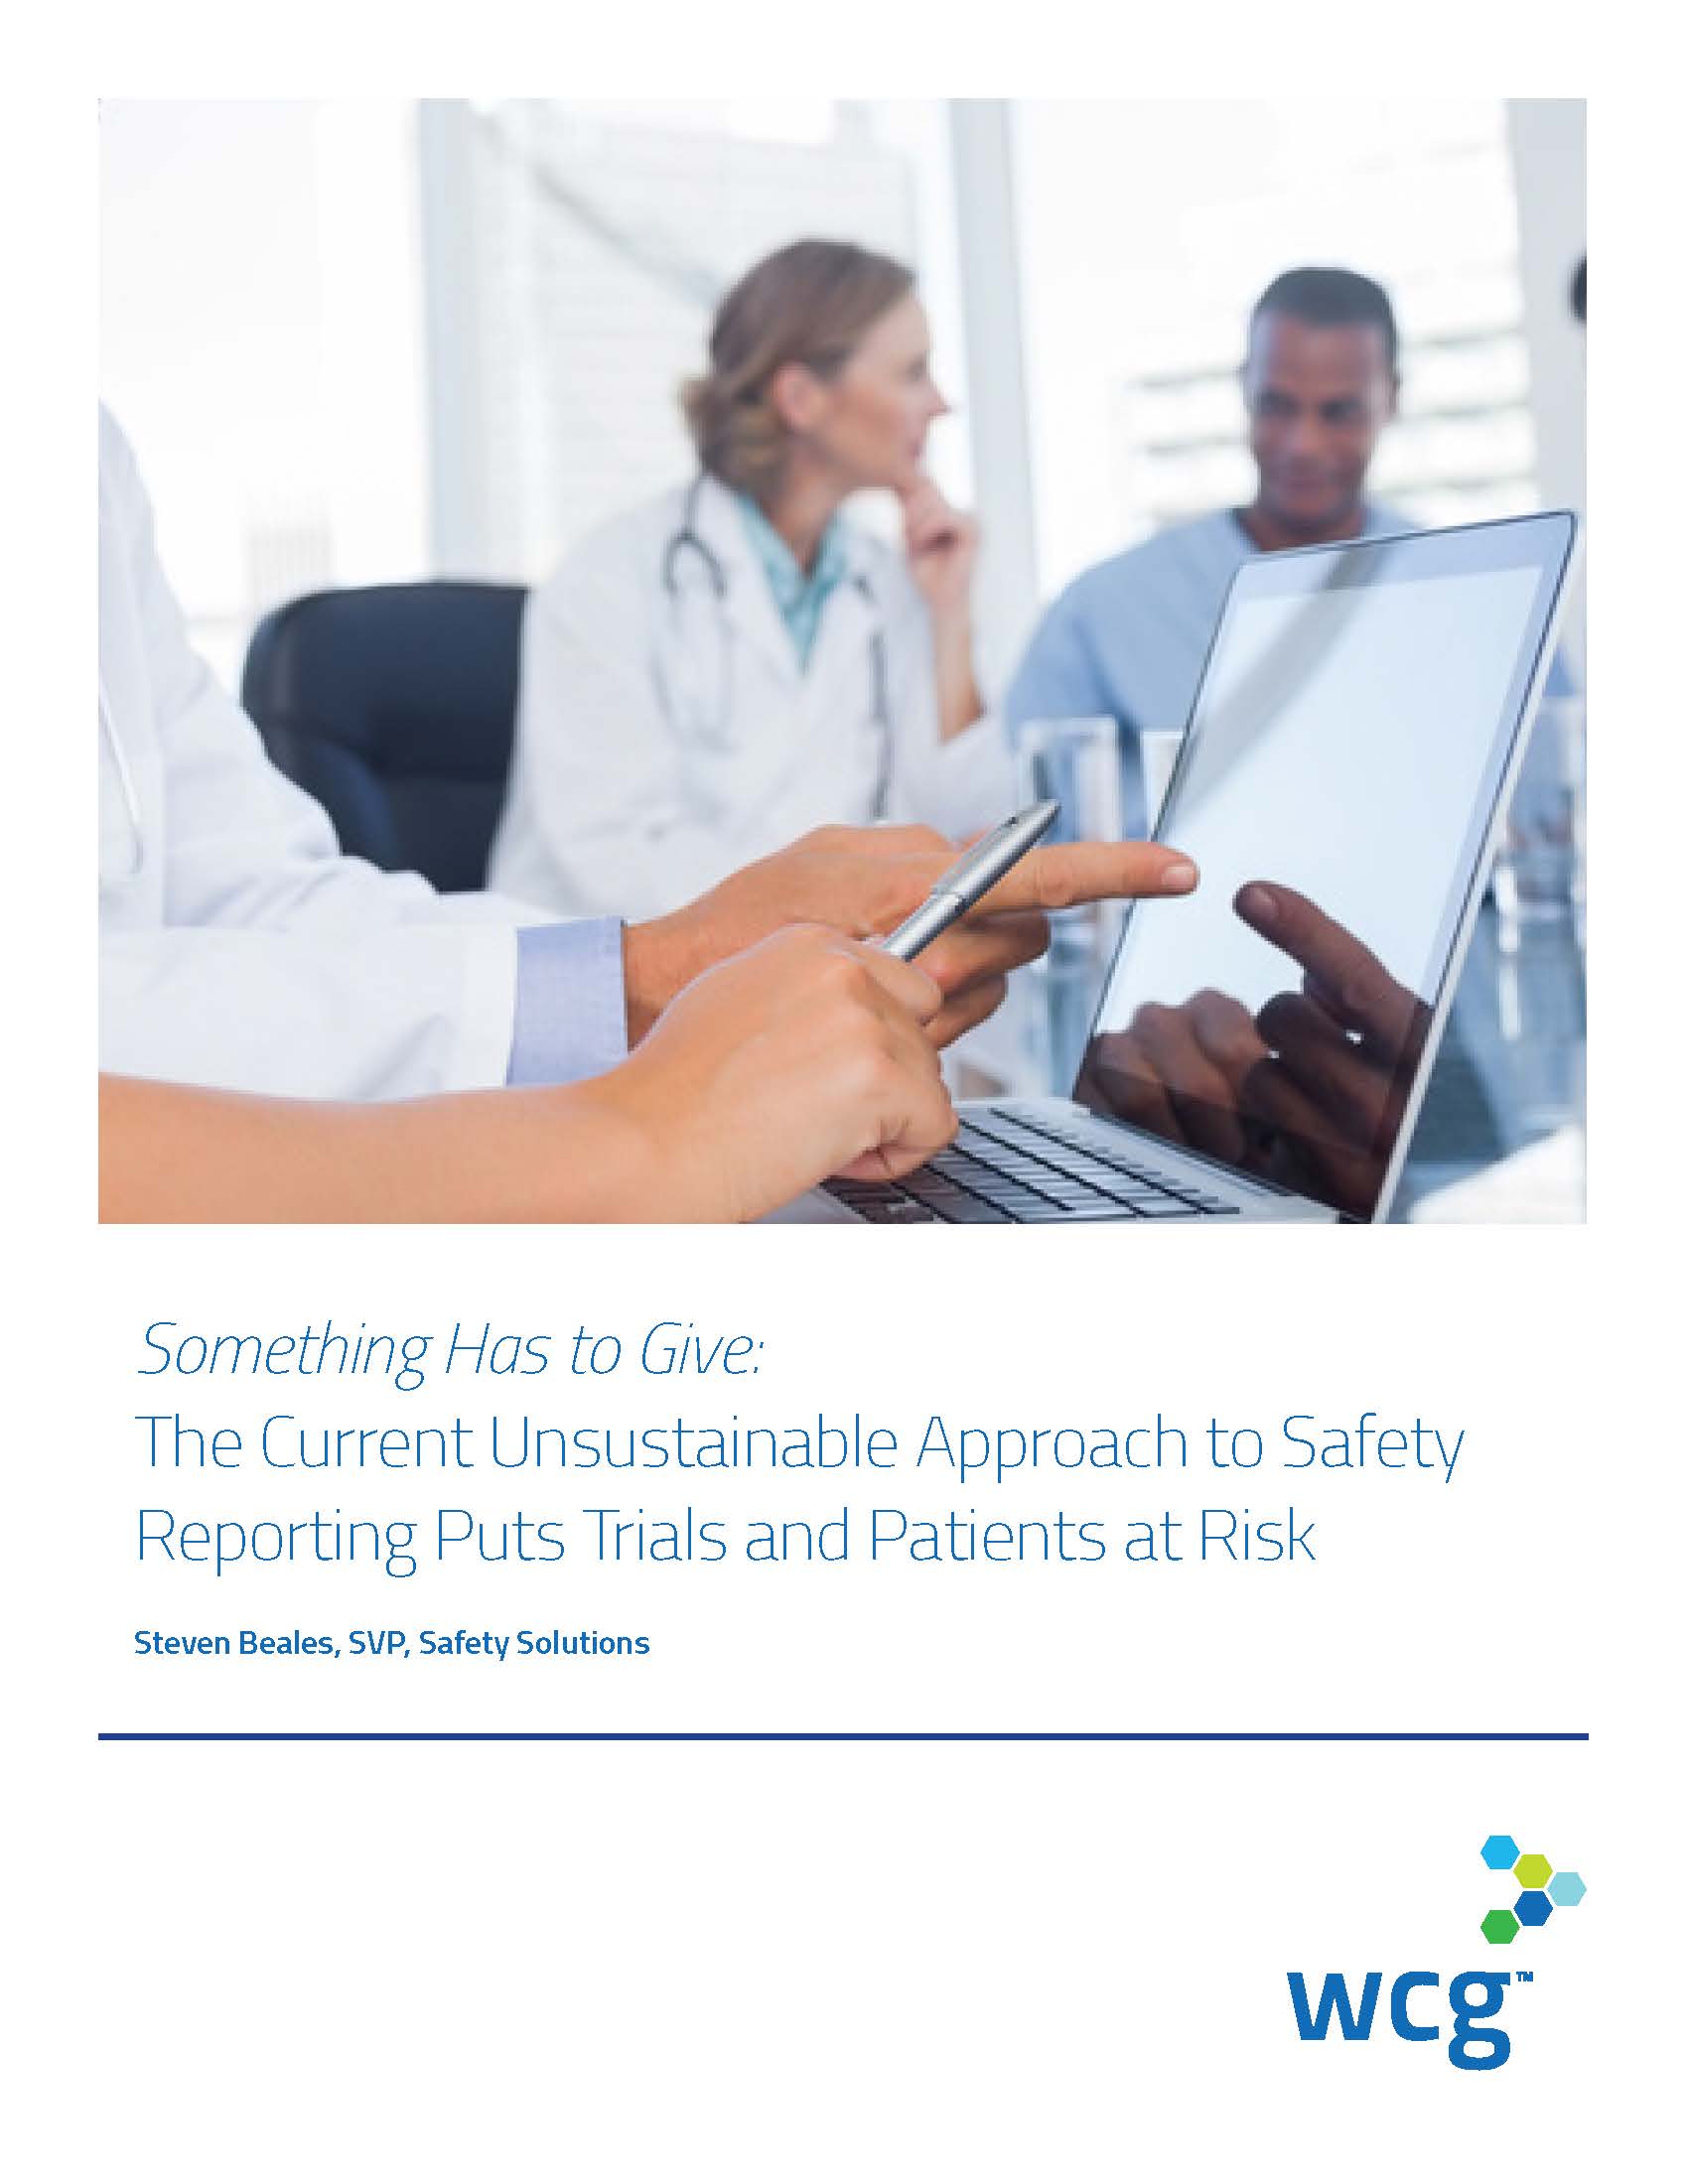 Something Has to Give: The Current Unsustainable Approach to Safety Reporting Puts Trials and Patients at Risk